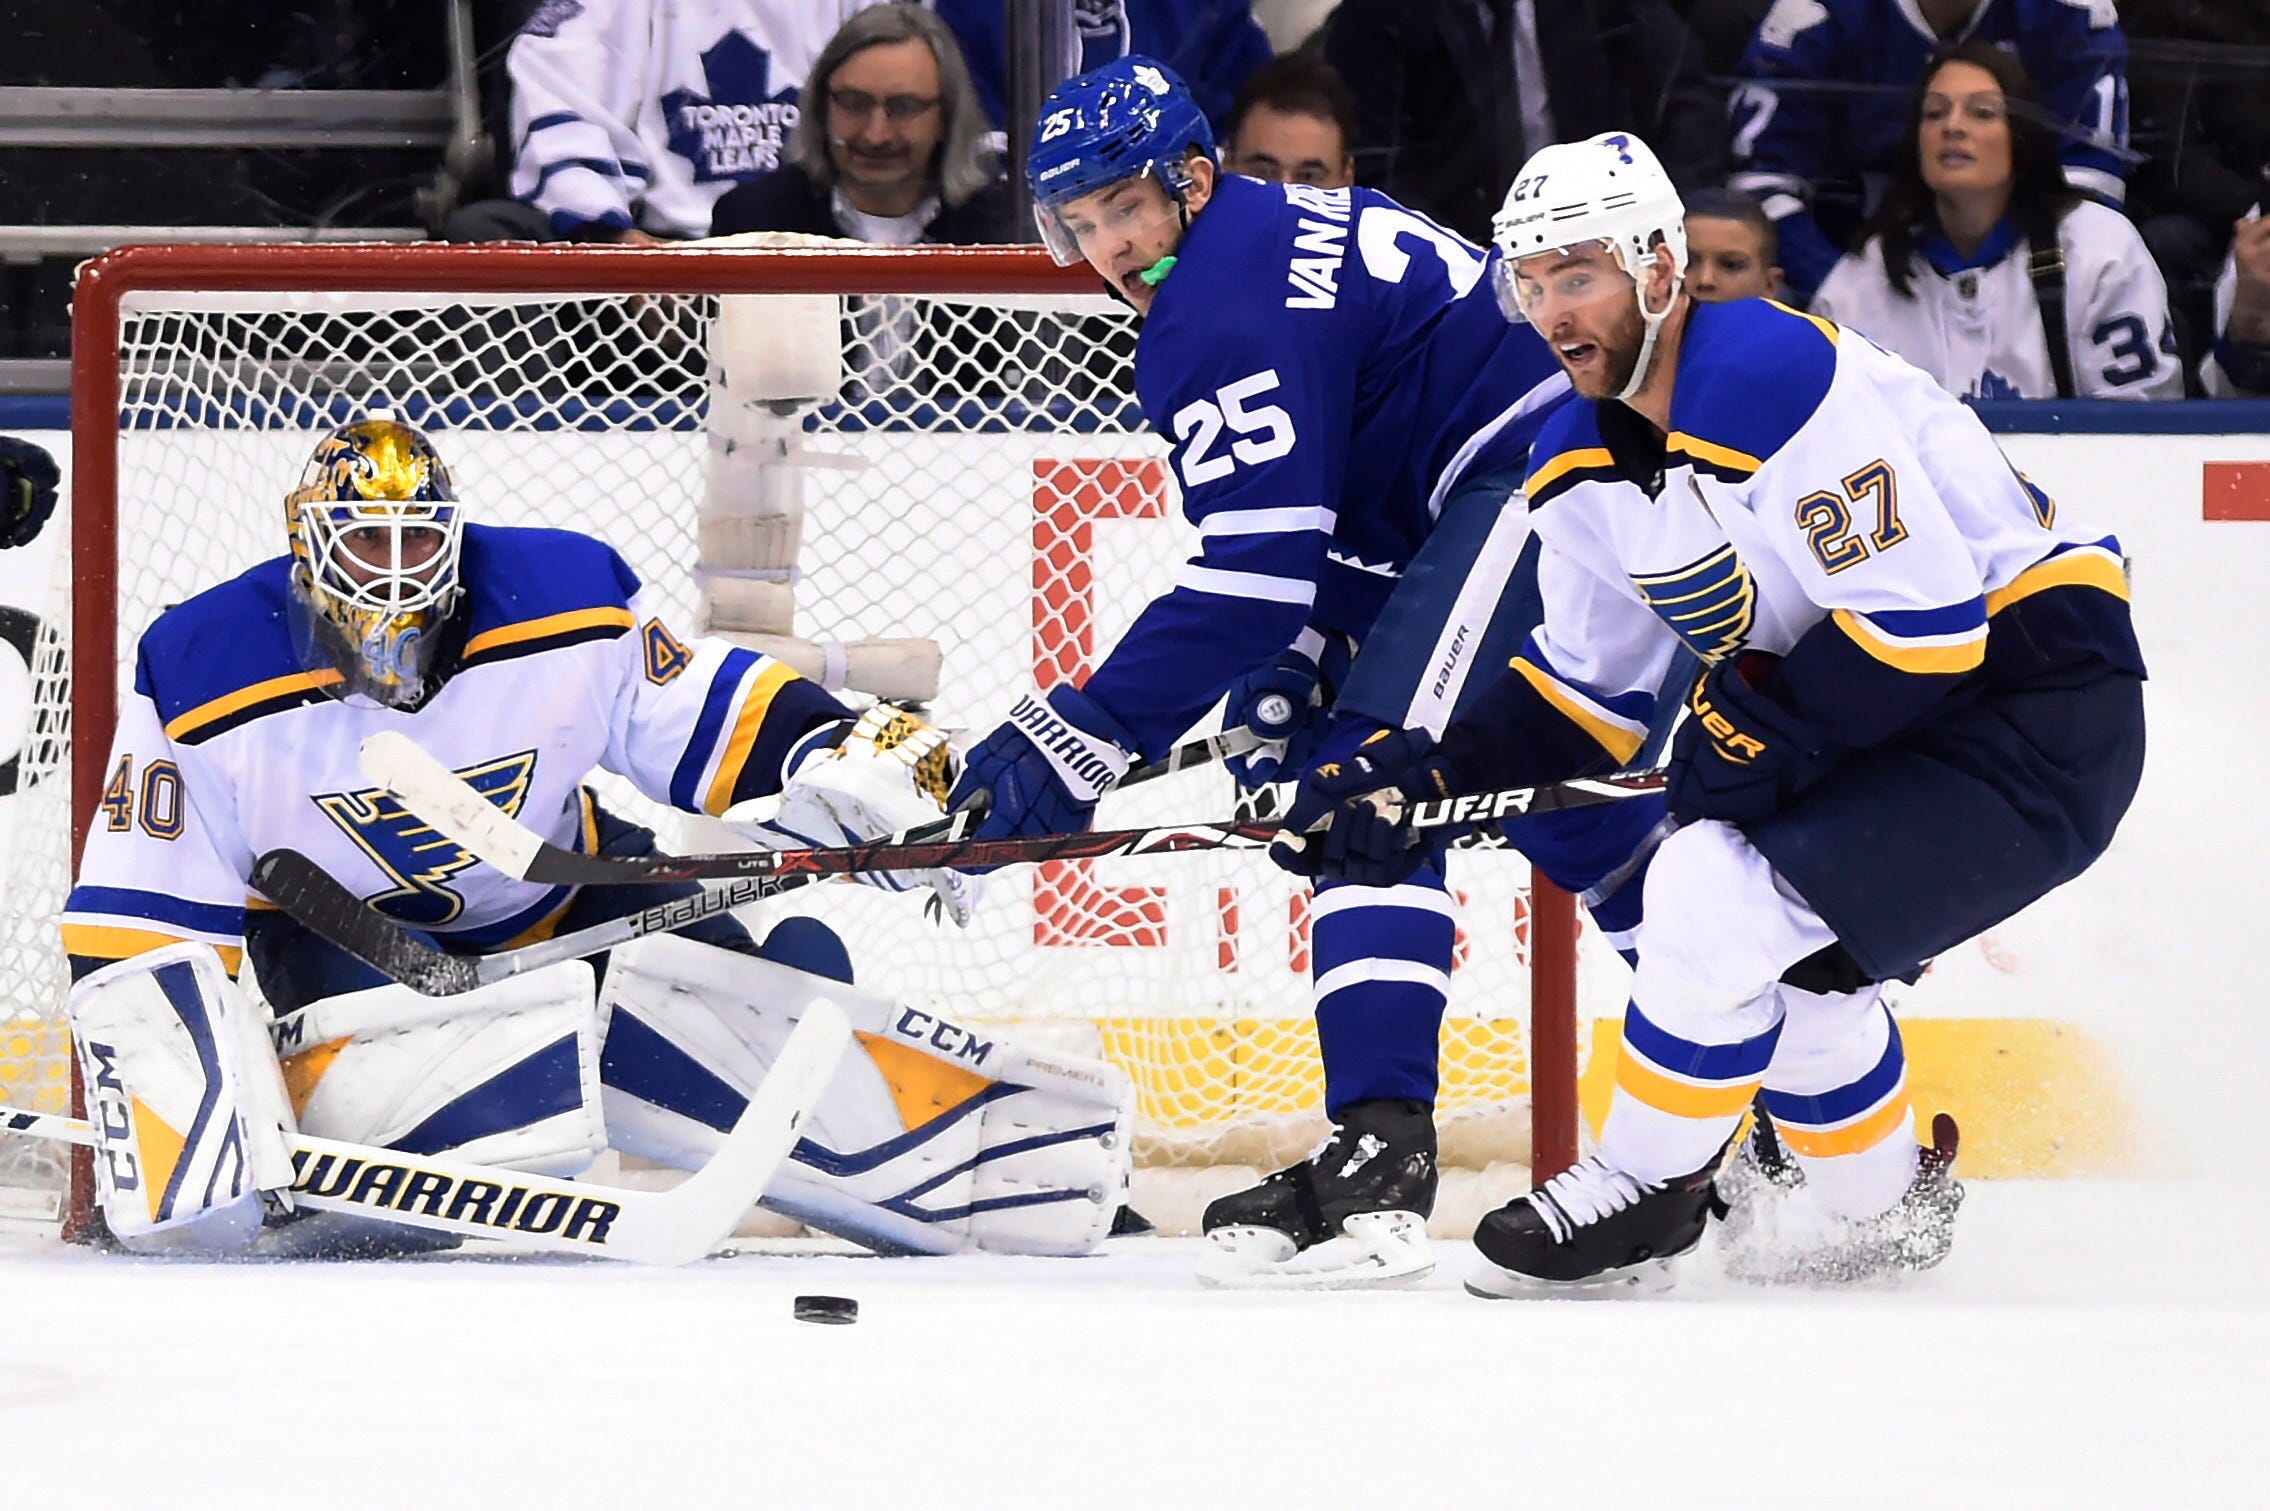 Steen ties it, Dunn scores in OT to lift Blues over Leafs